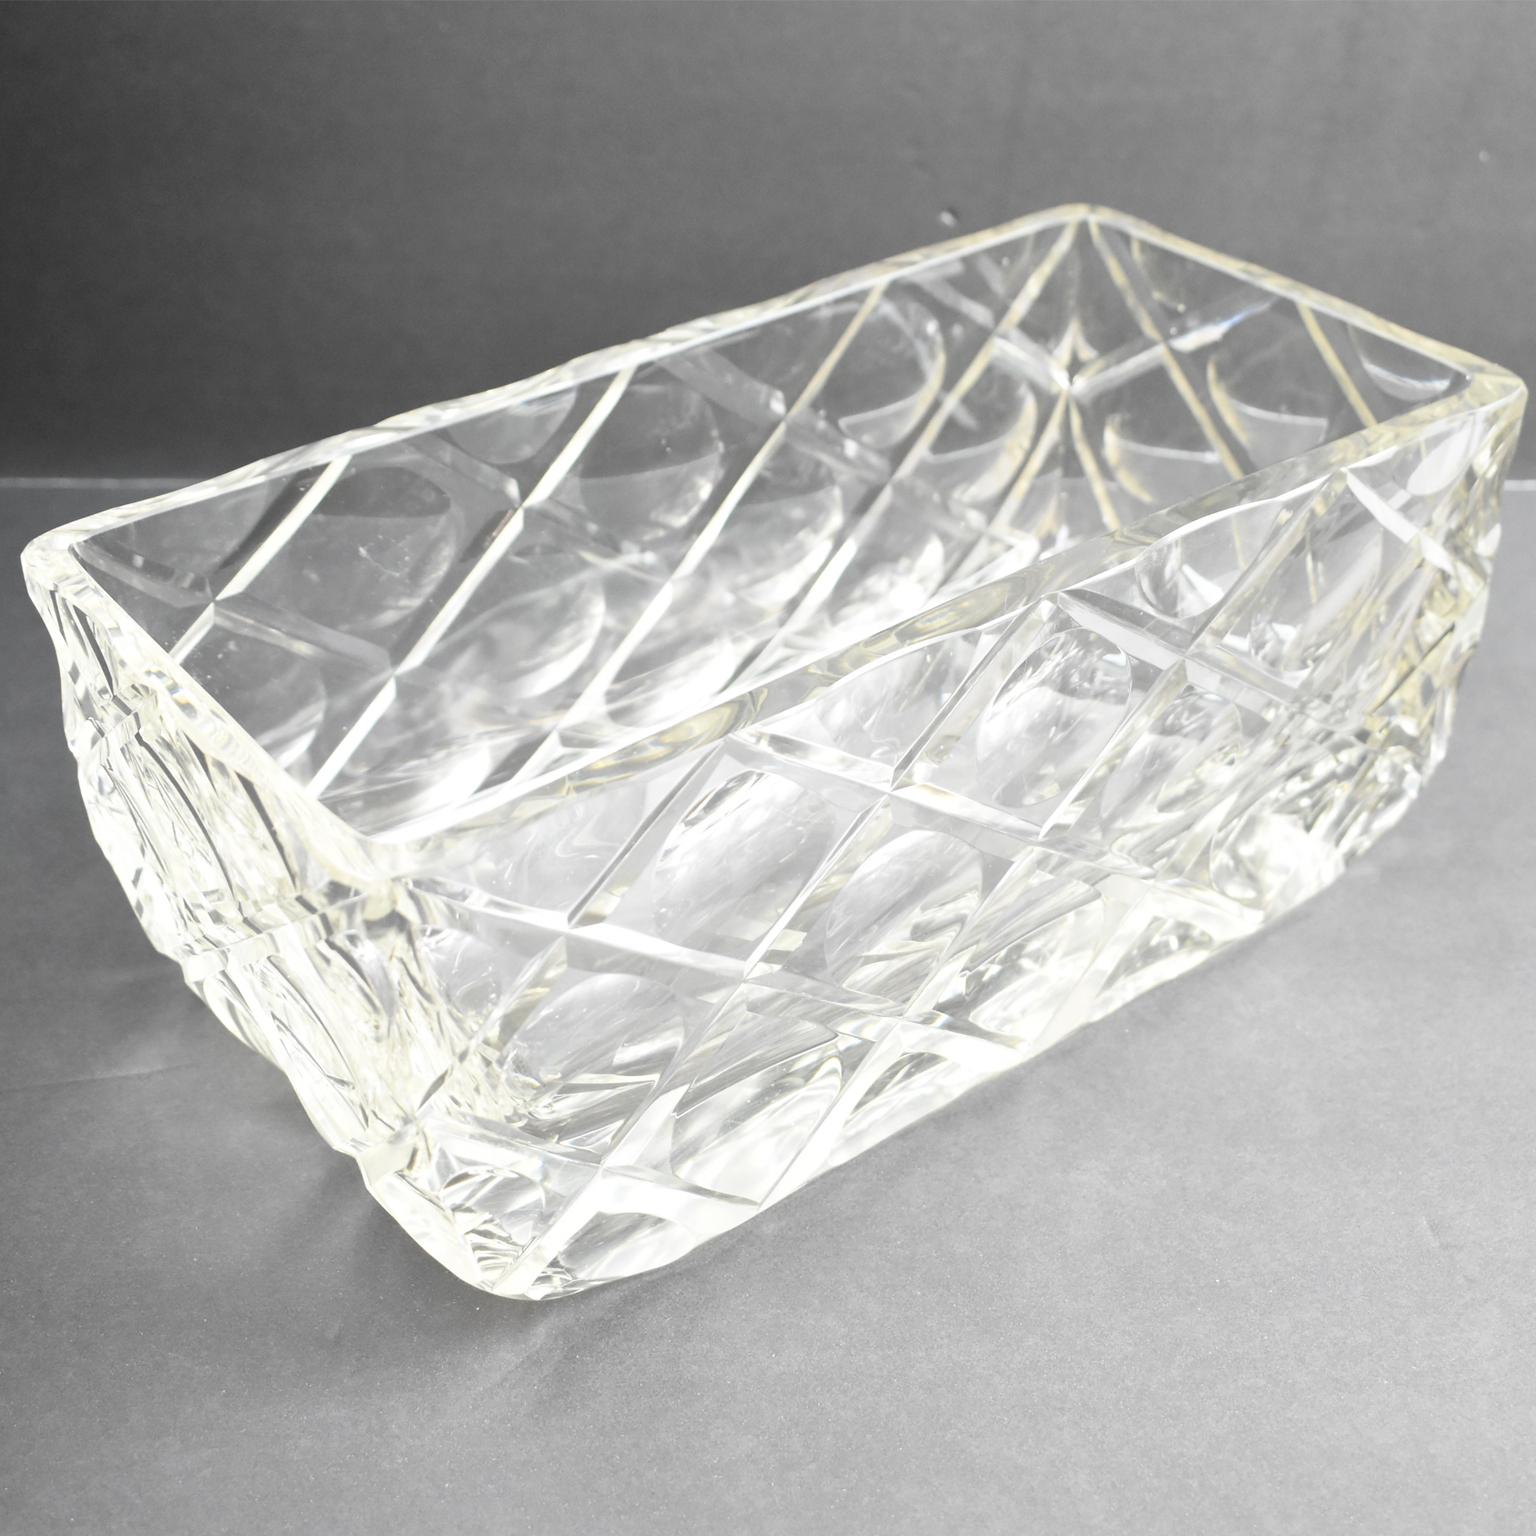 Mid-20th Century Art Deco Etched Crystal Centerpiece Decorative Bowl, France 1930s For Sale